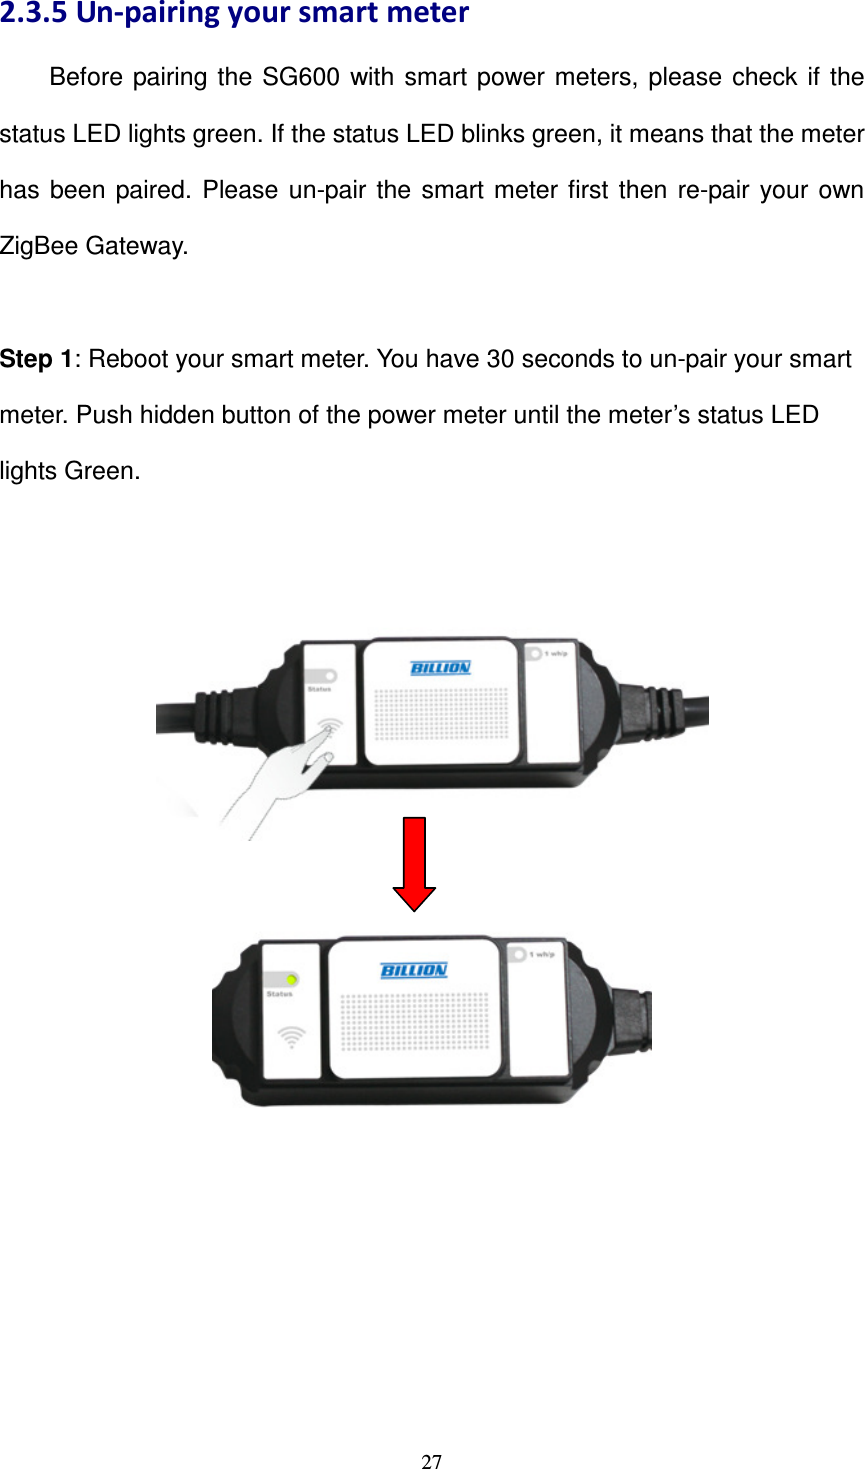   272.3.5 Un-pairing your smart meter         Before  pairing the  SG600  with  smart power meters,  please  check  if  the status LED lights green. If the status LED blinks green, it means that the meter has  been  paired.  Please  un-pair  the  smart  meter first  then  re-pair your  own ZigBee Gateway.  Step 1: Reboot your smart meter. You have 30 seconds to un-pair your smart meter. Push hidden button of the power meter until the meter’s status LED lights Green.            